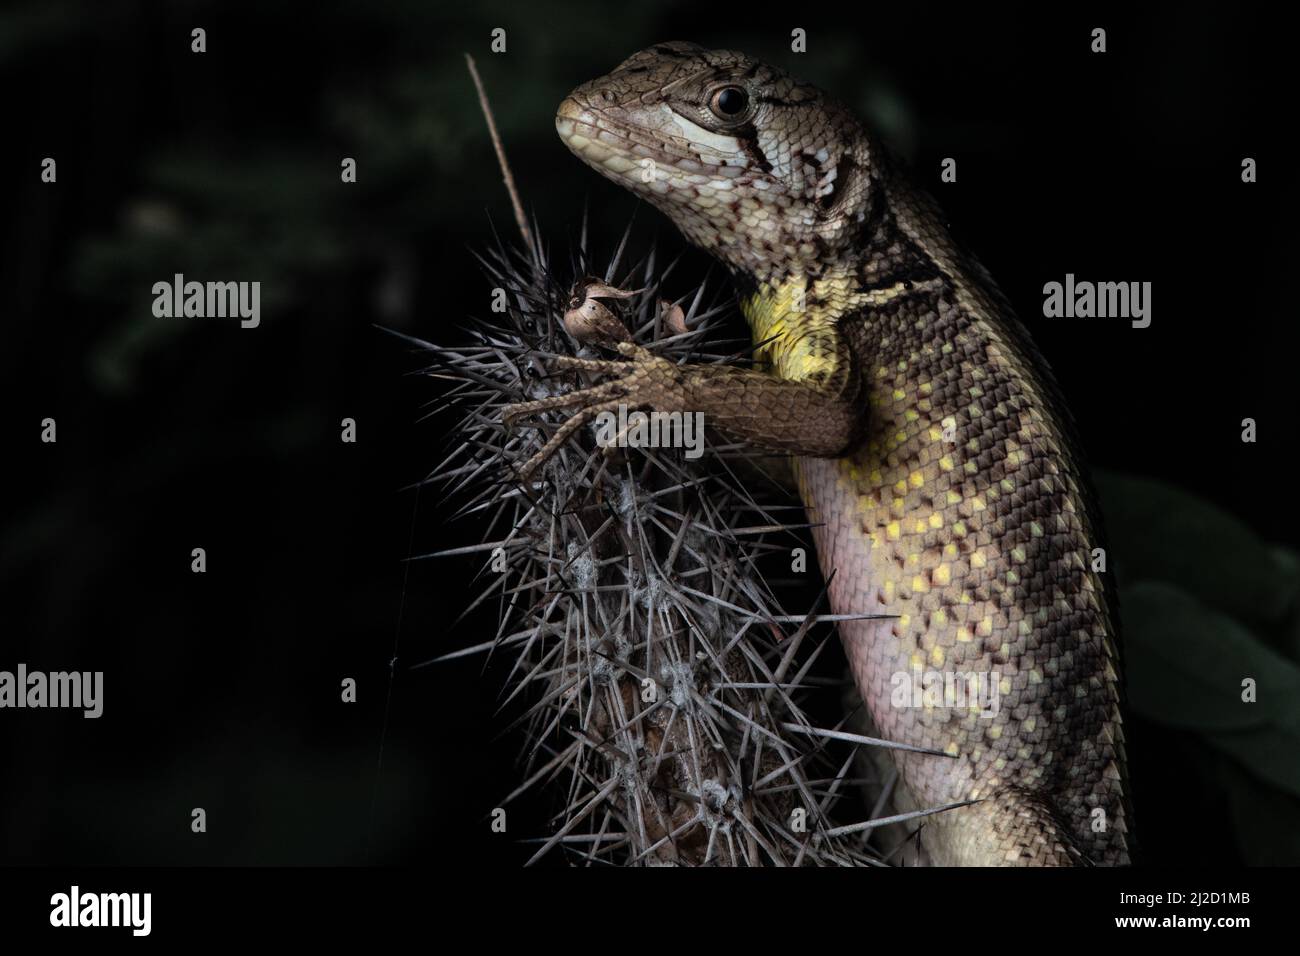 A puyango whorltail iguana (Stenocercus puyango) sitting on a cactus in the tumbesian dry forest in Southern Ecuador. Stock Photo